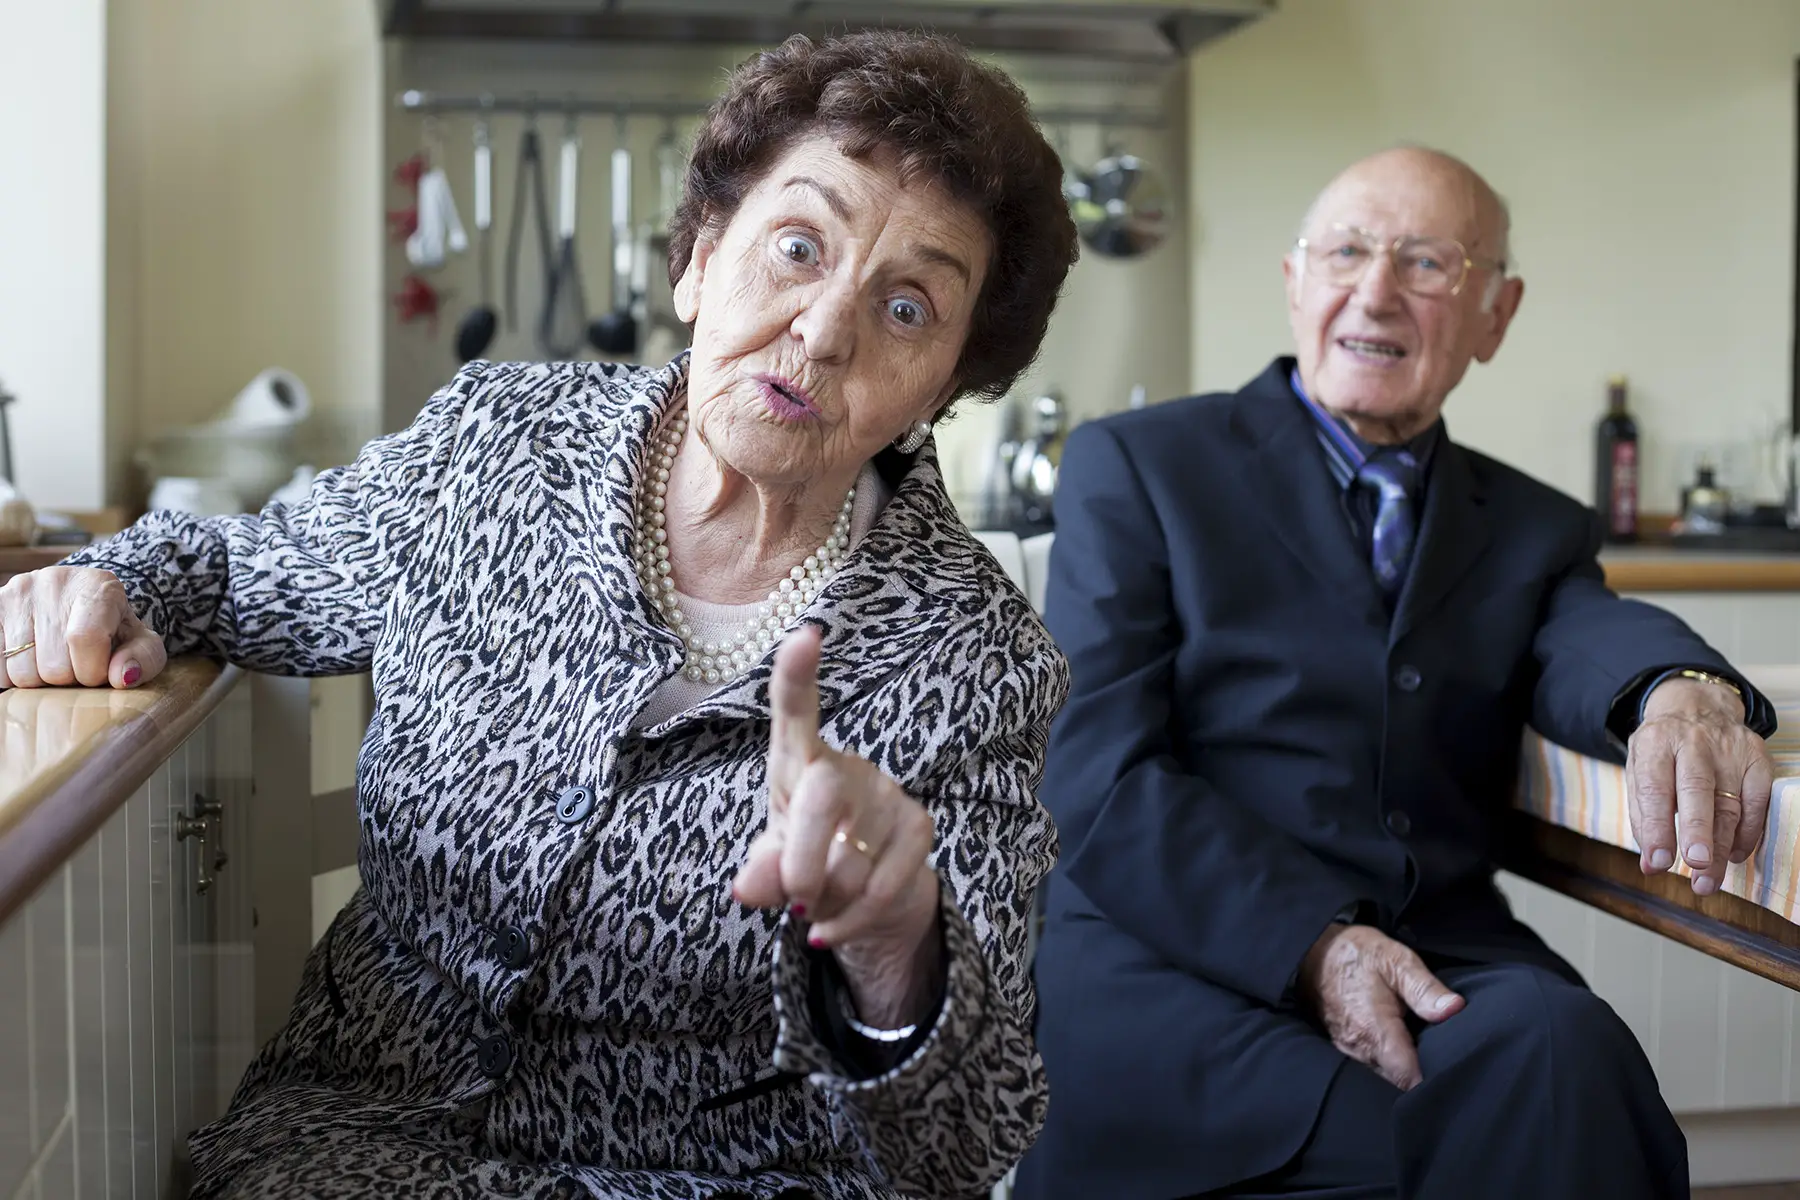 Retired couple in Italy, looks straight at camera, woman holds up her finger as if she is making a point or telling someone off